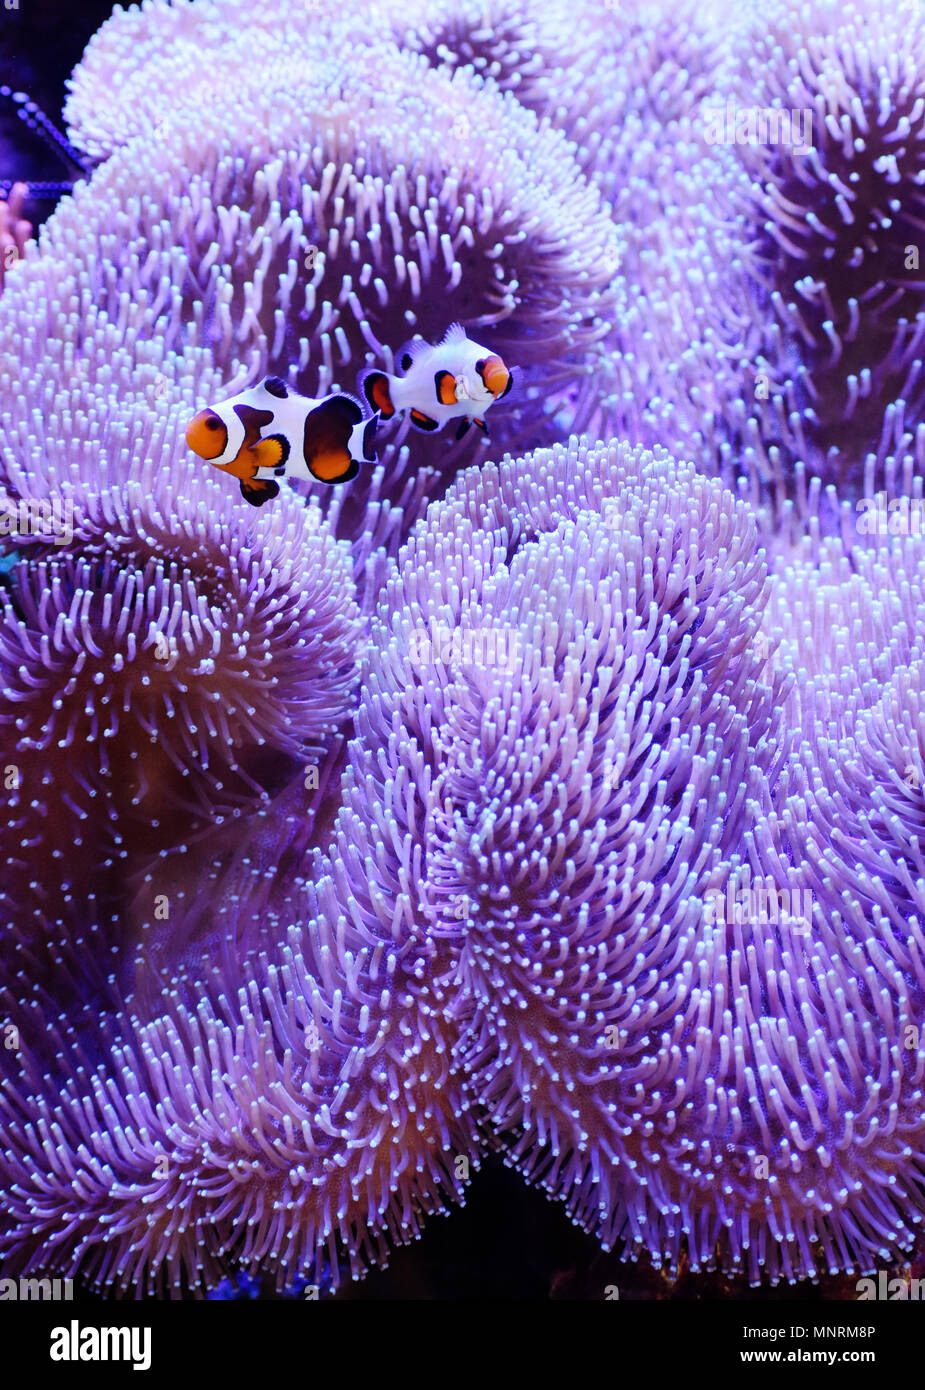 Gladiator and Wyoming White Fancy Clownfish Pair Visiting Lush Toadstool Leather Coral Stock Photo